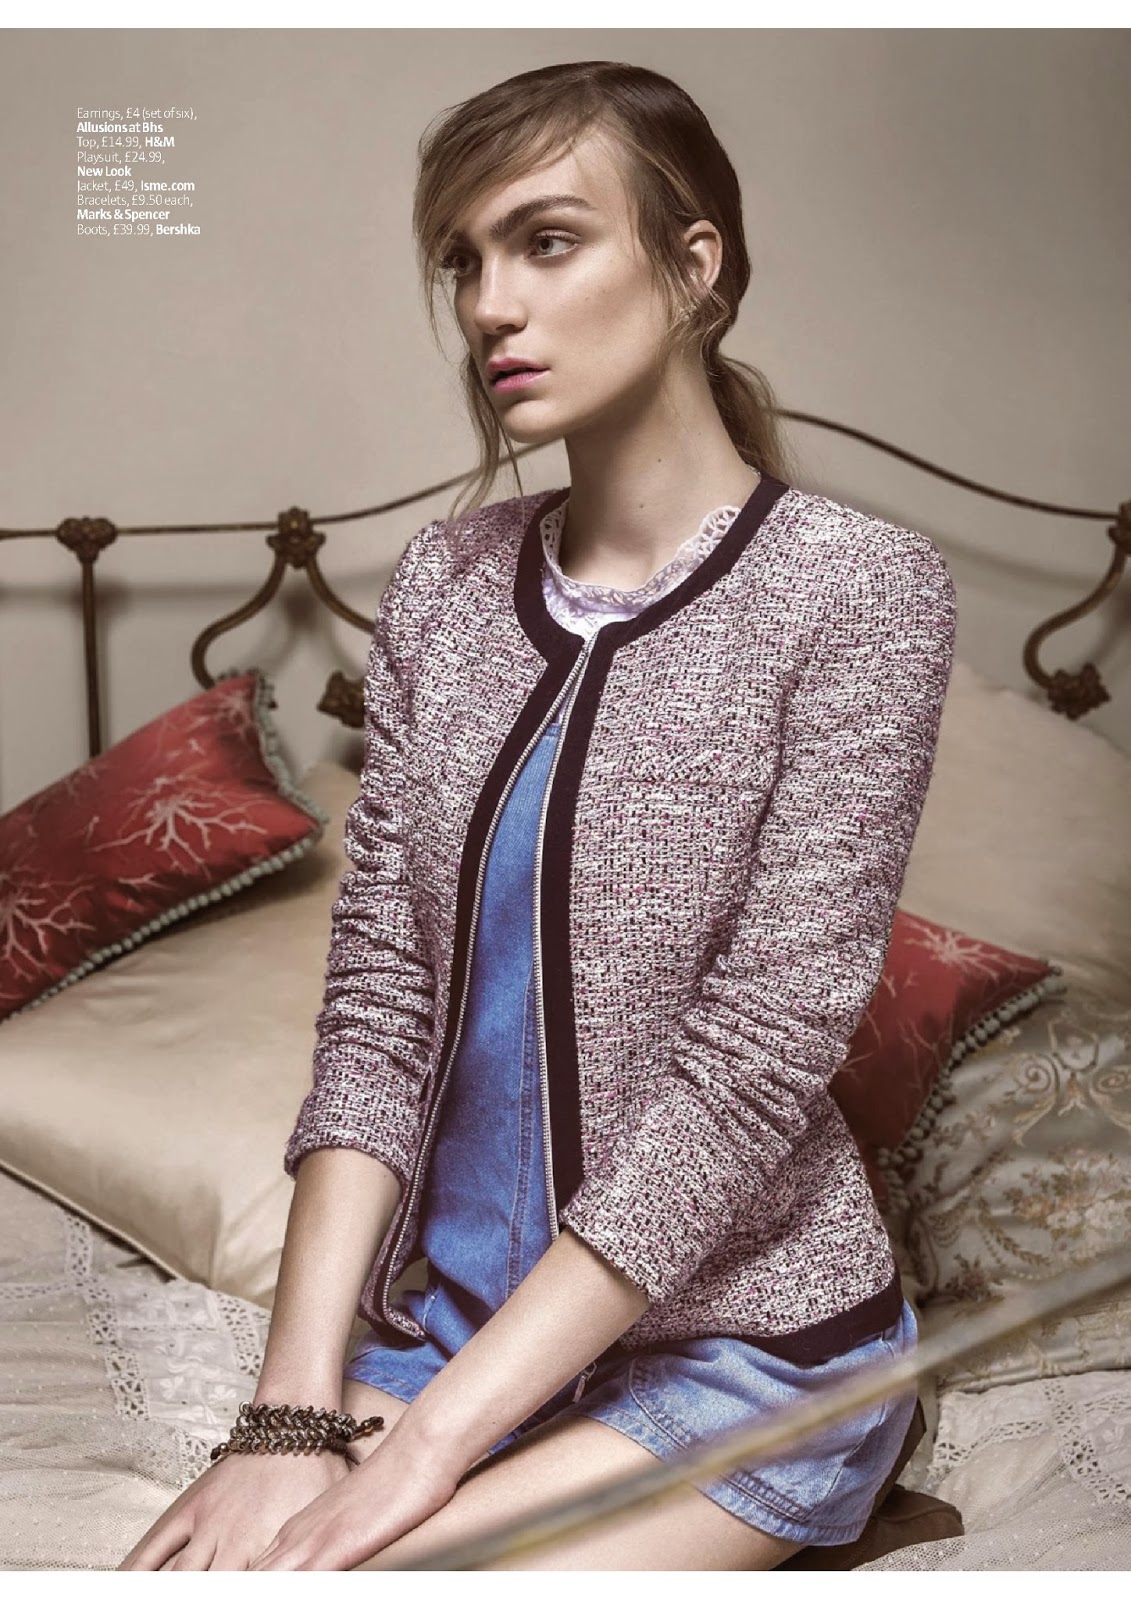 Chloe Wood HQ Pictures Look UK Magazine Photoshoot February 2014 By ...